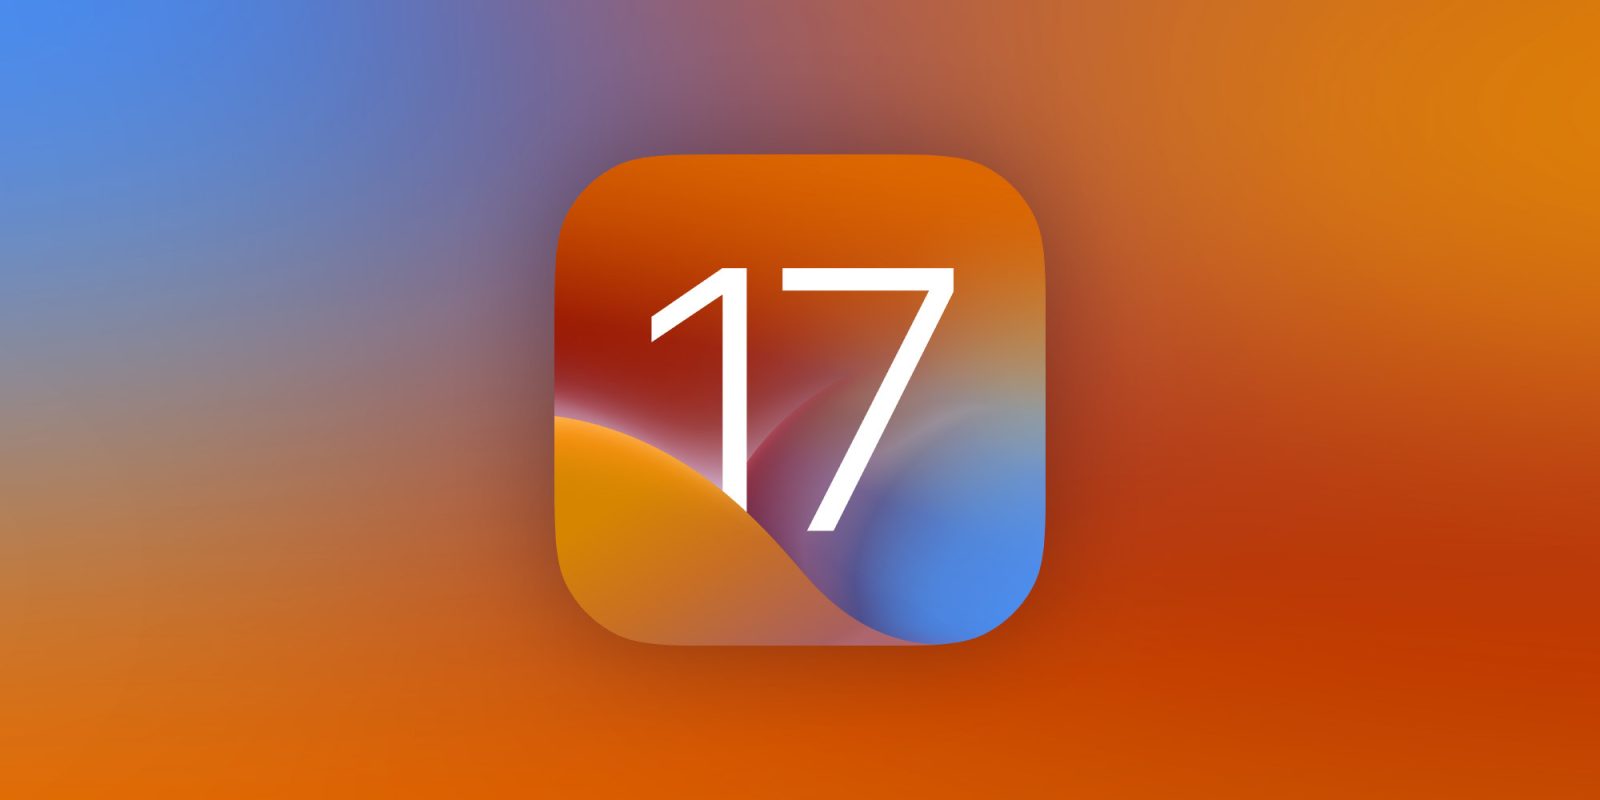  An illustration of the iOS 17 icon, which has a gradient background of orange and blue with a white number 17 in the center.